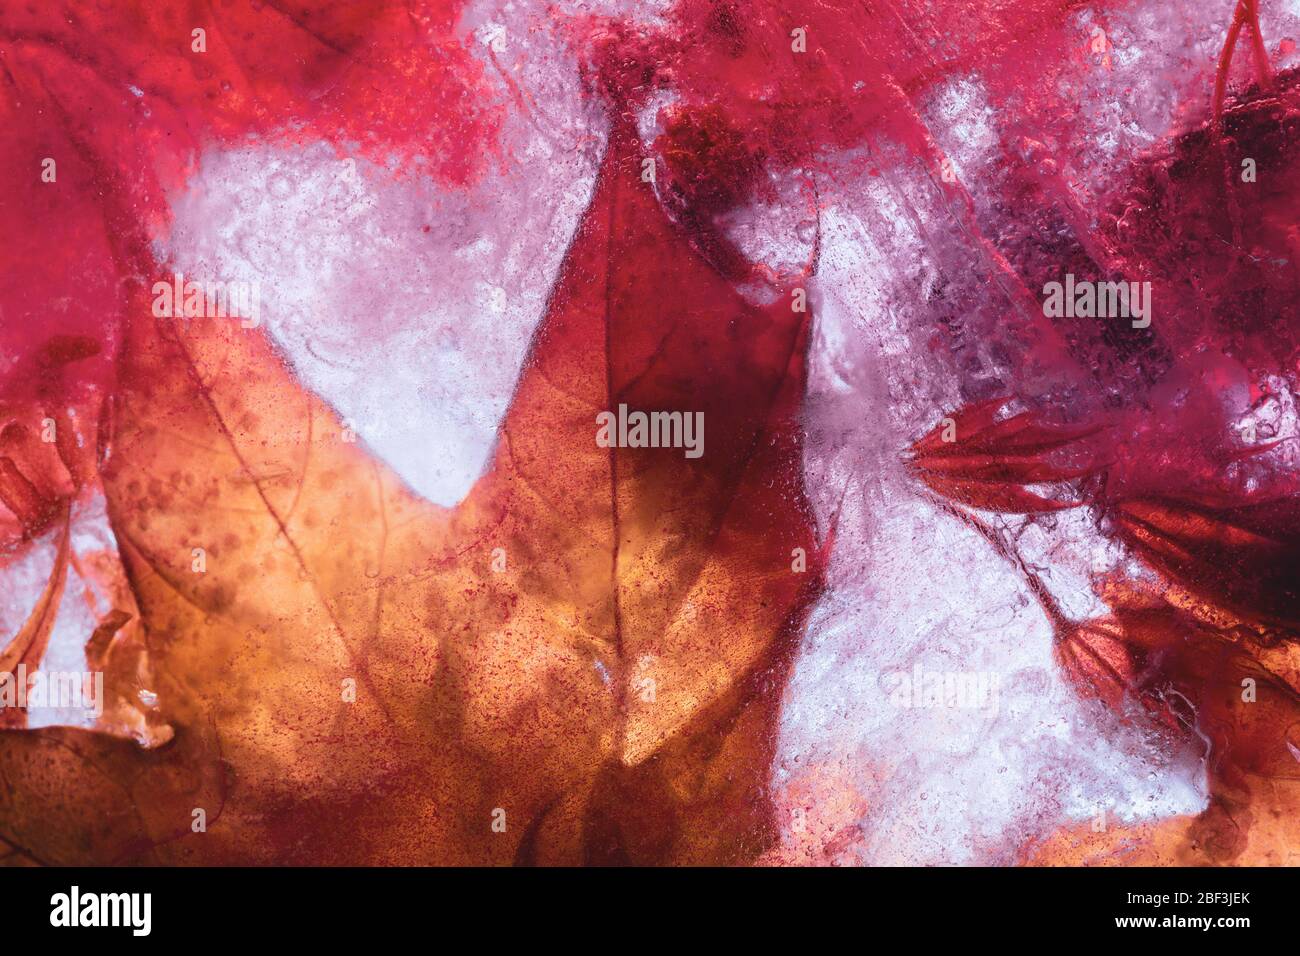 Maple leaves freeze plate in red-yellow tones: creative background Stock Photo